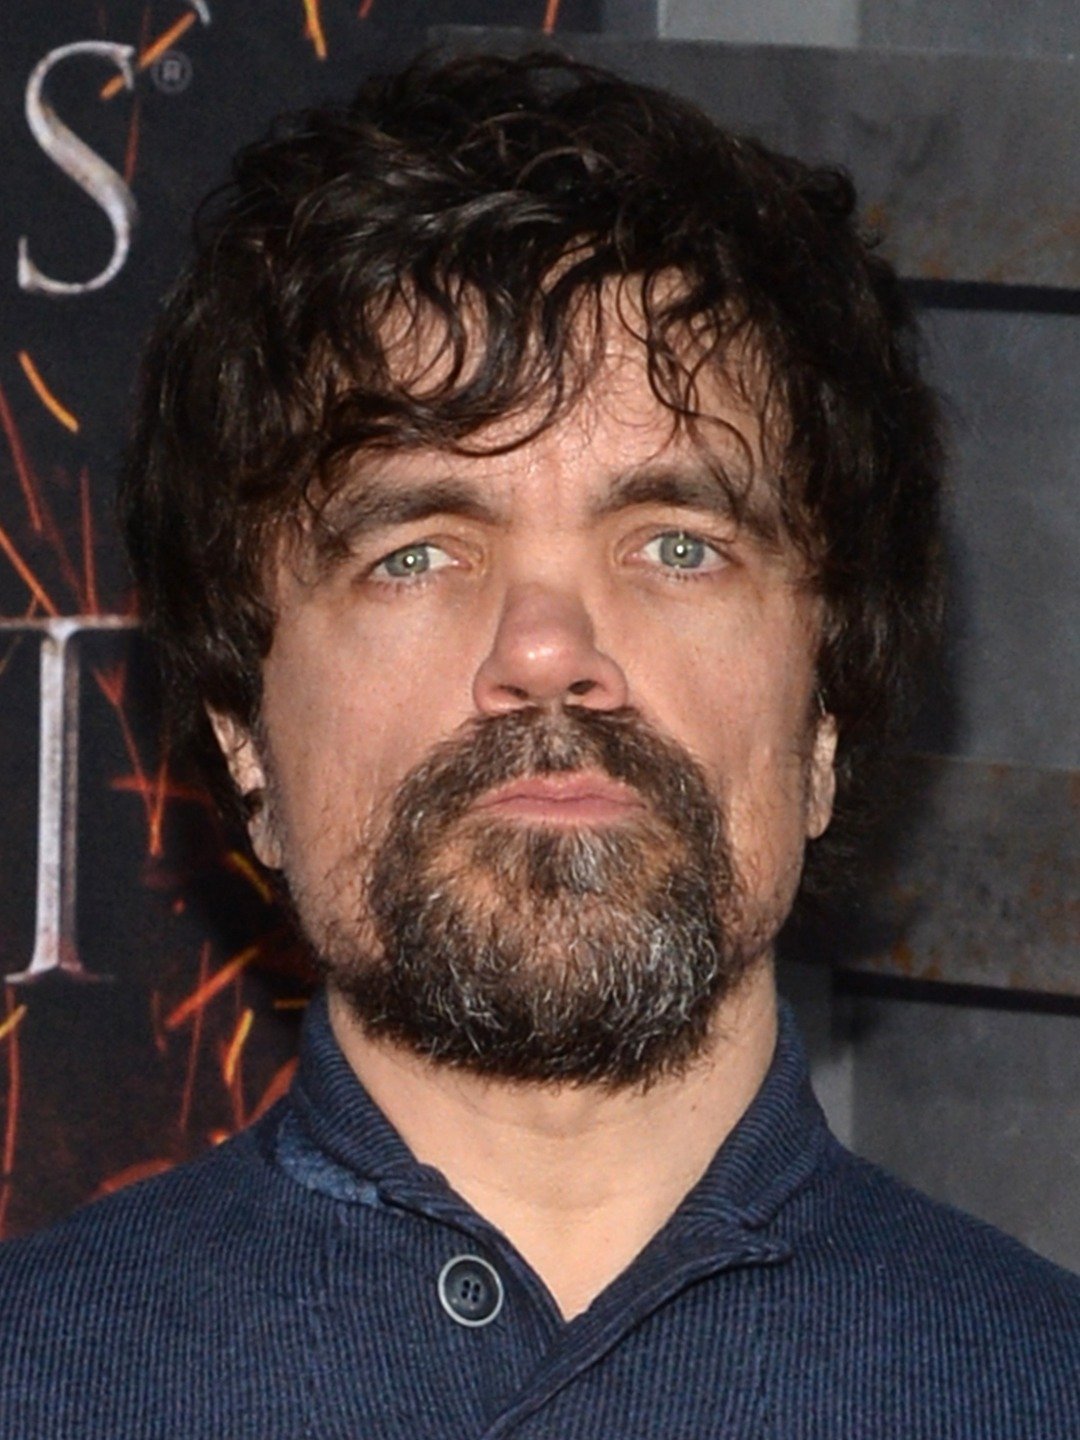 How tall is Peter Dinklage?